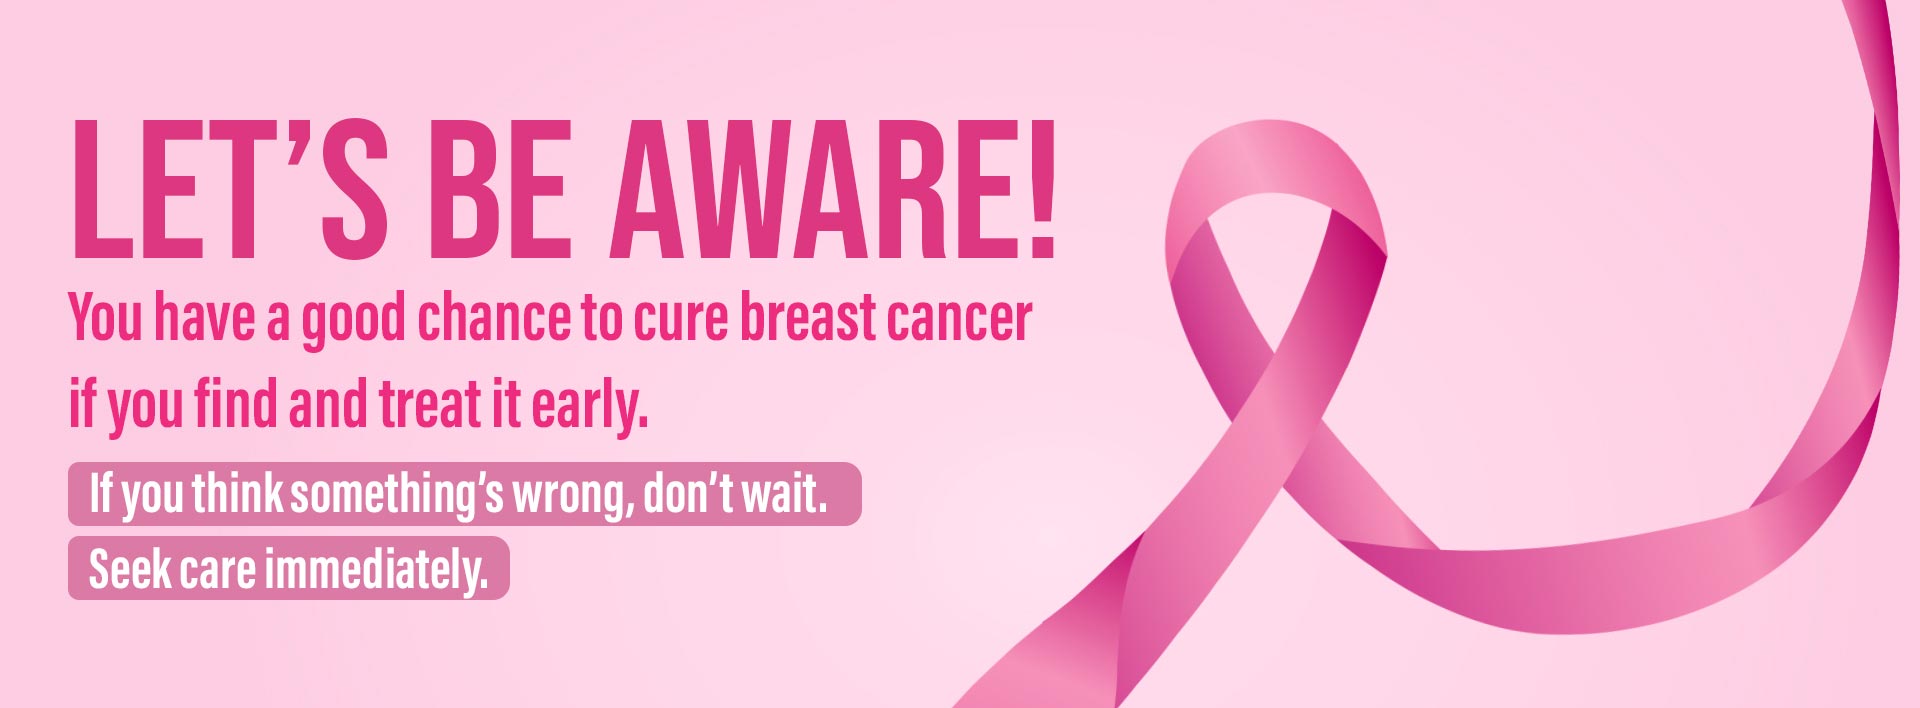 WHO EMRO, Breast Cancer Awareness Month 2022, Campaigns